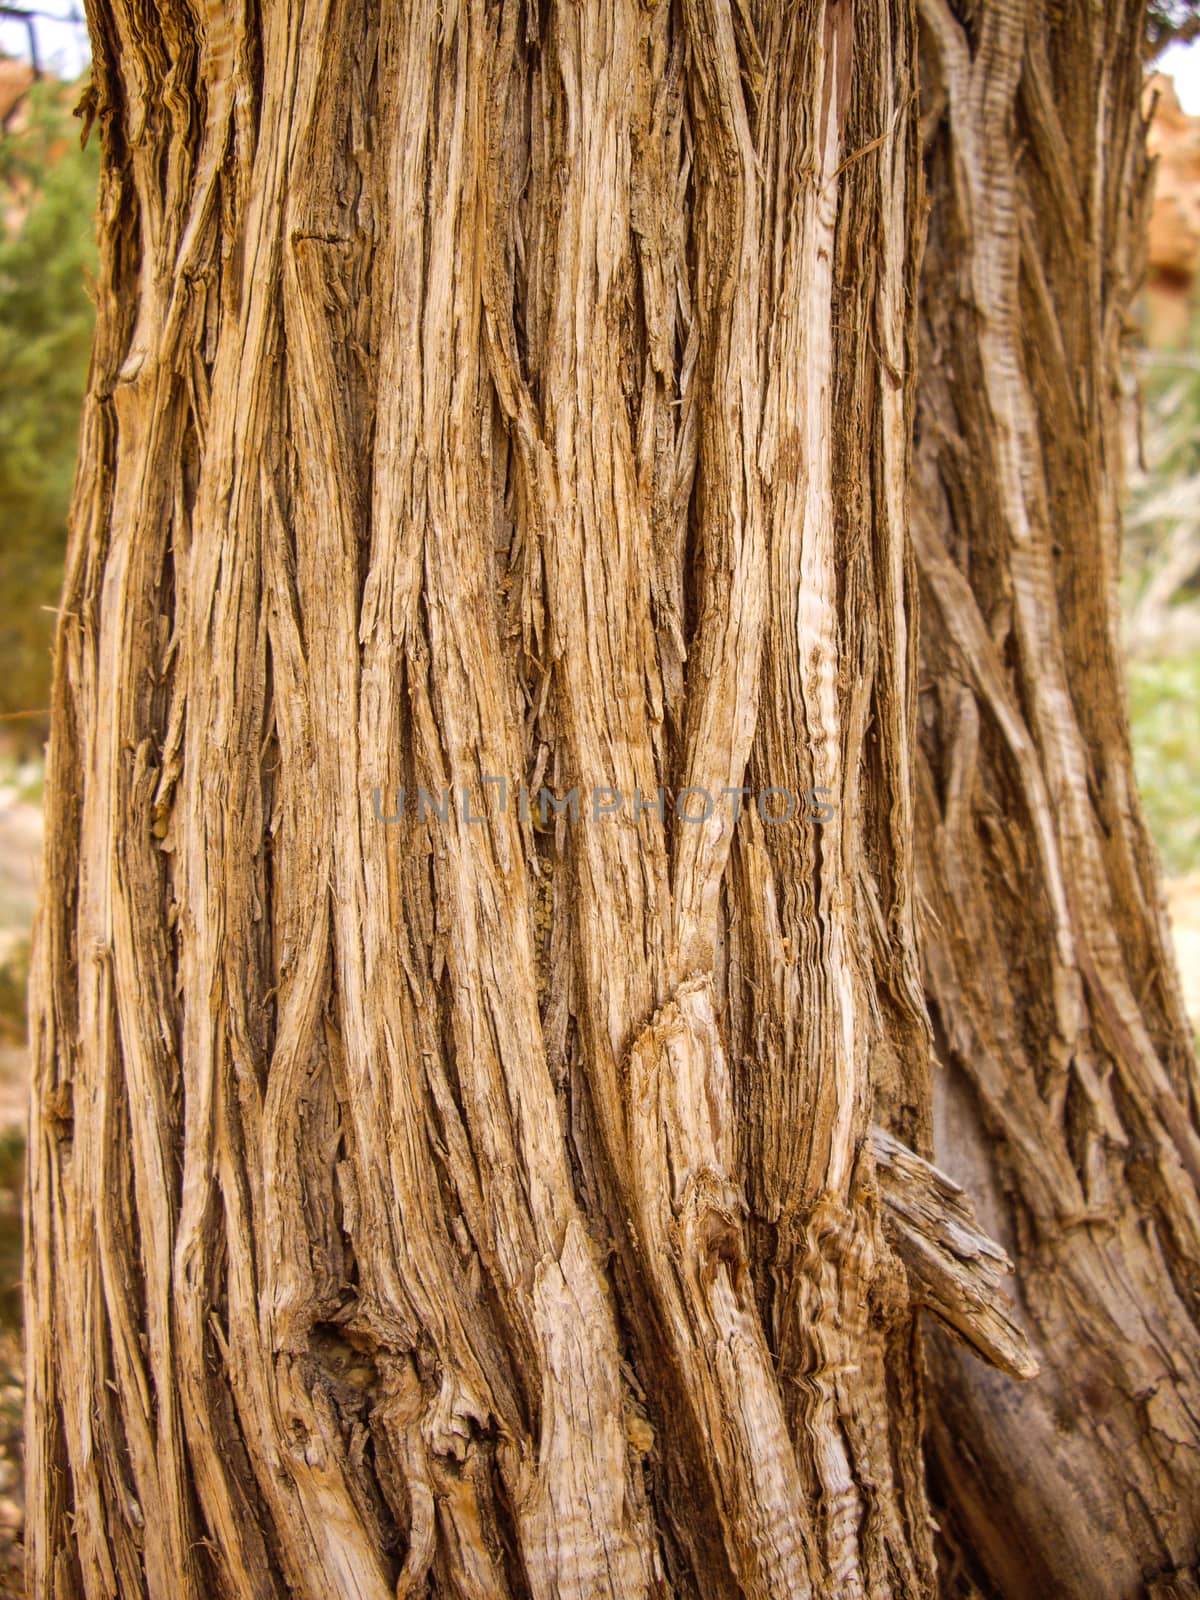 Dry fibers of old tree bark in Bryce Canyon by emattil